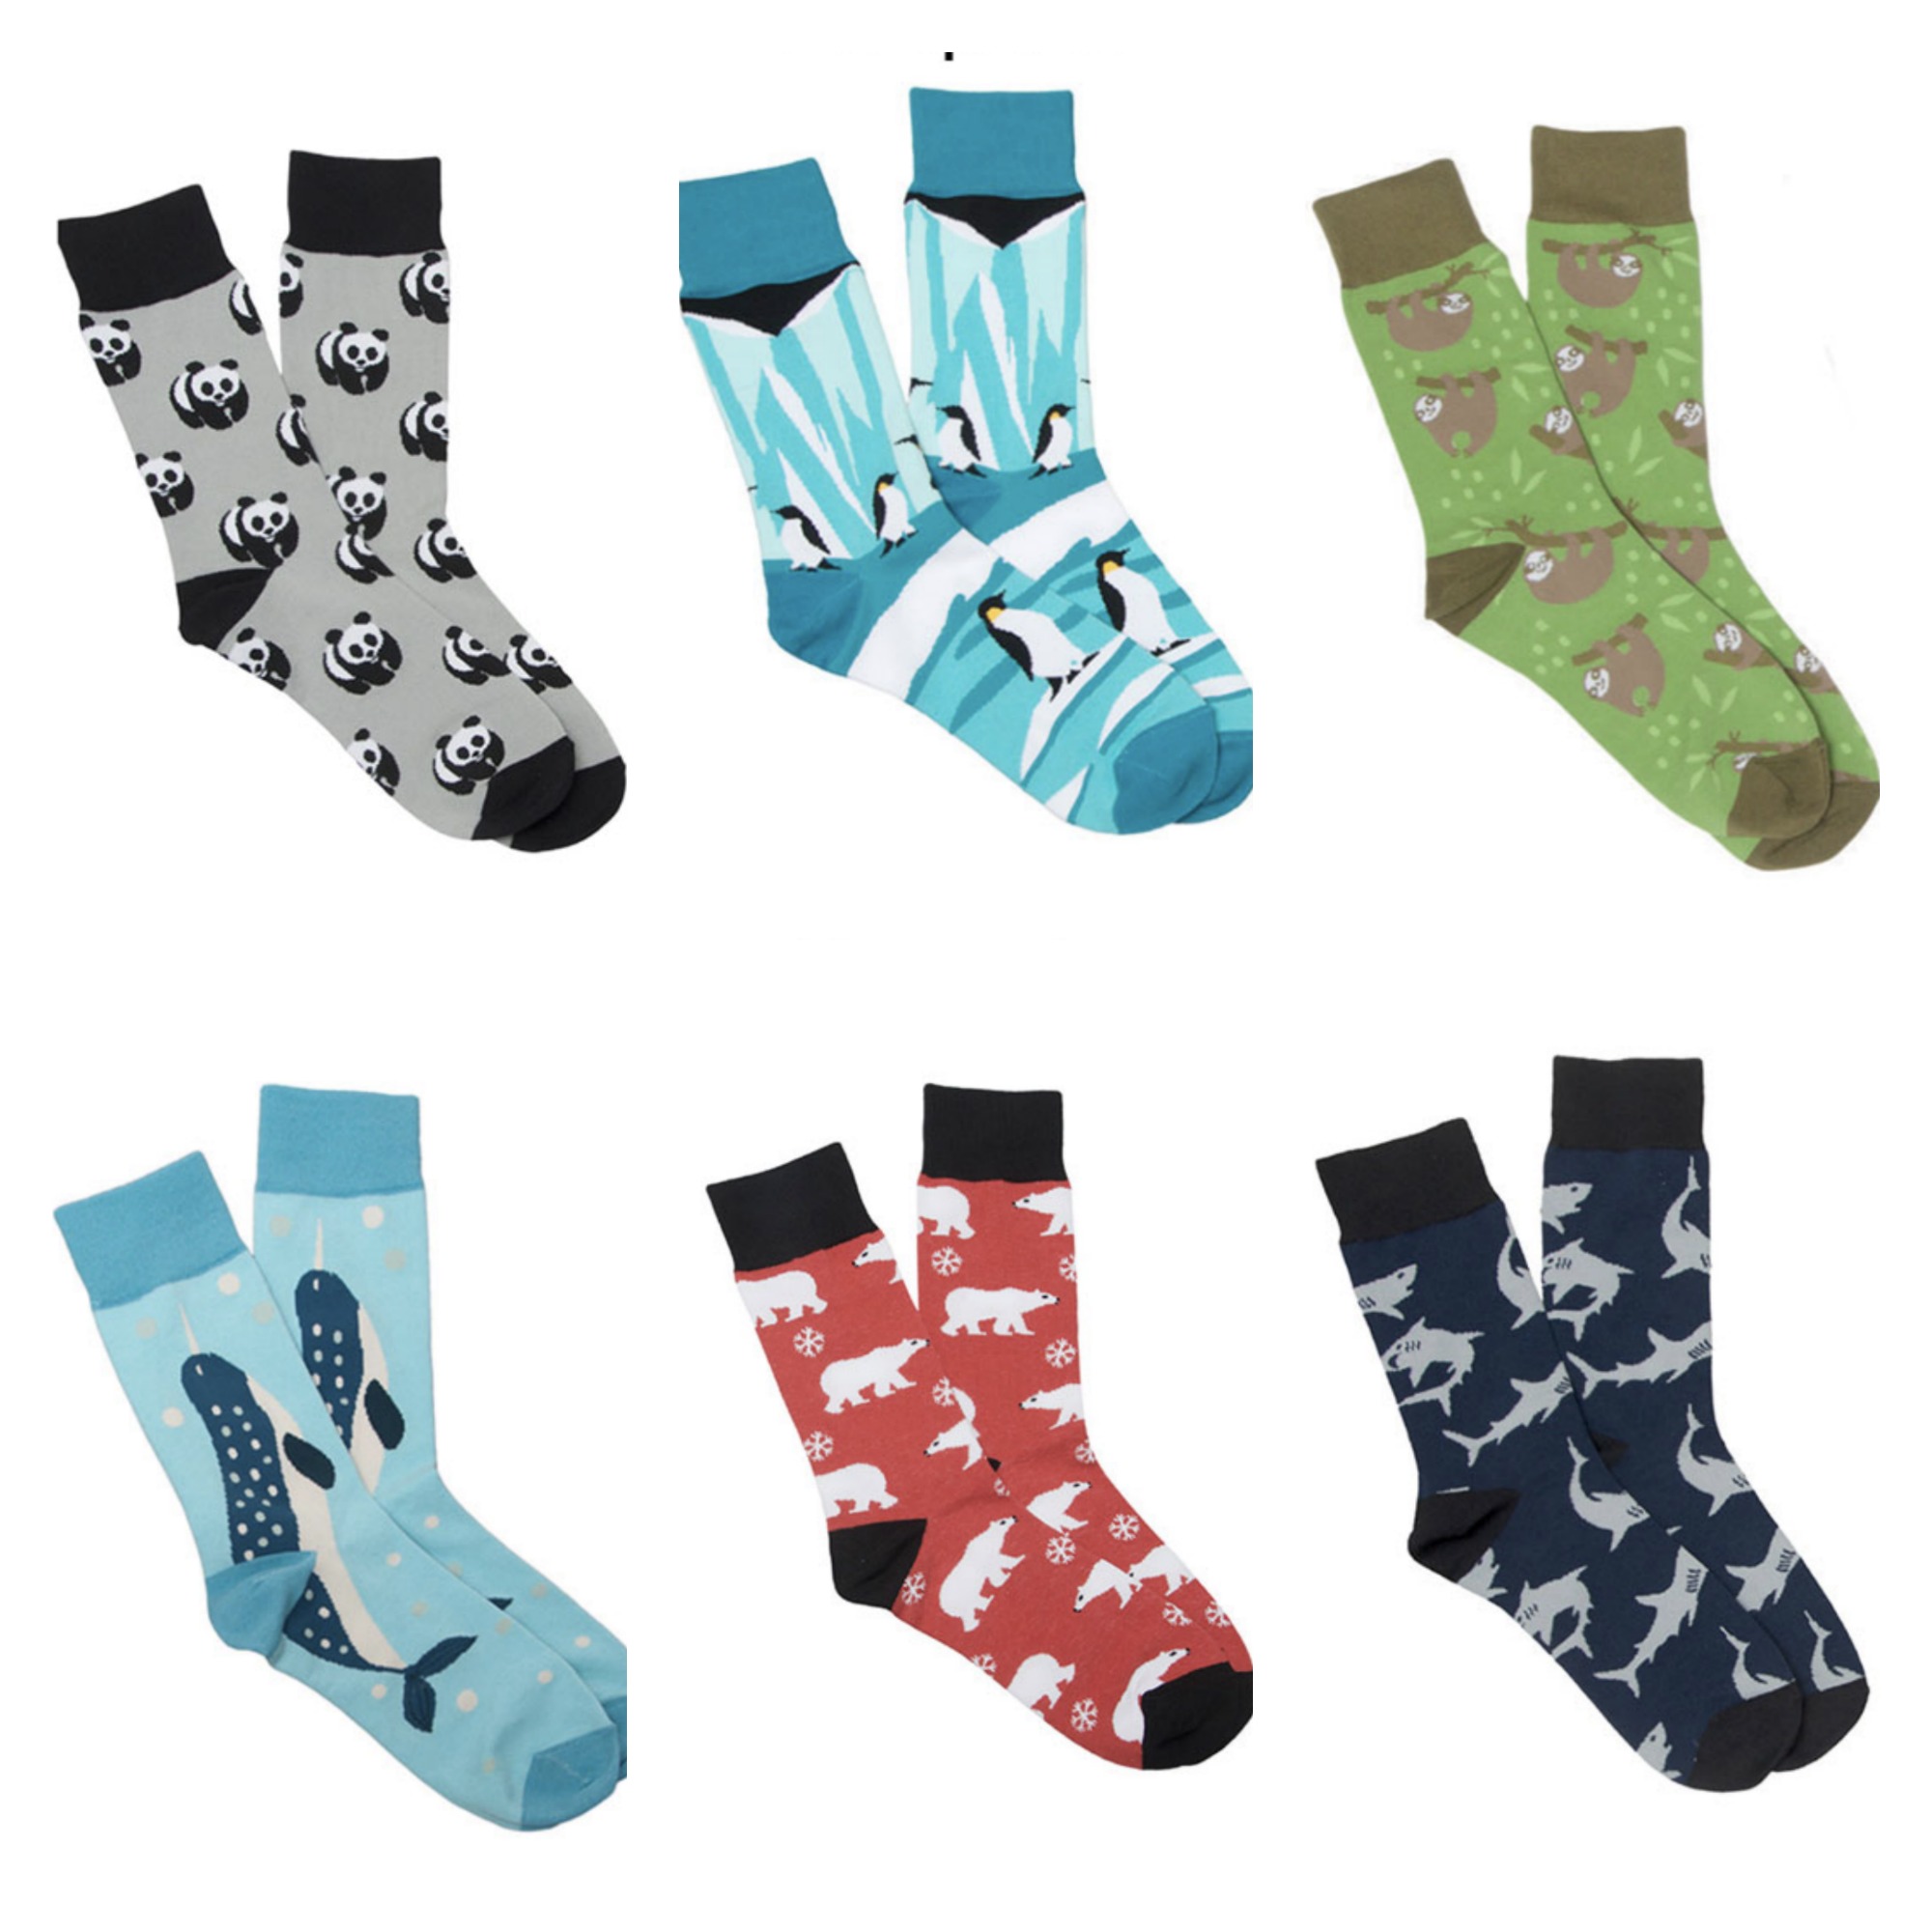 Meaningful gifts for kids: Bundle of socks supporting the WWF